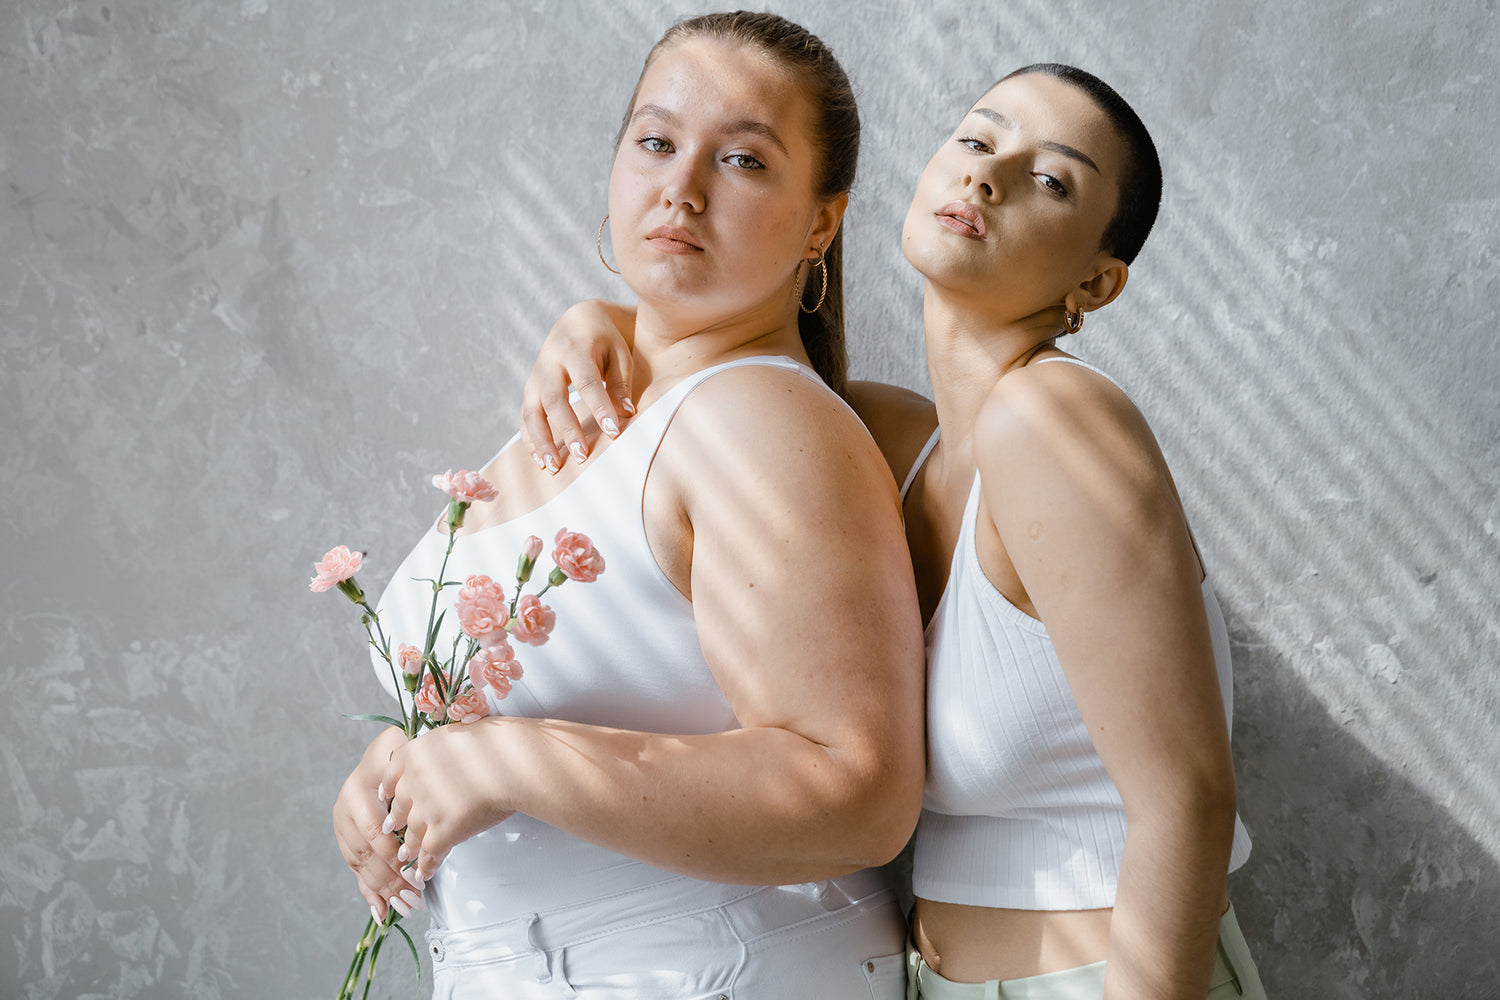 Why We Need to Talk About Body Positivity in Fashion